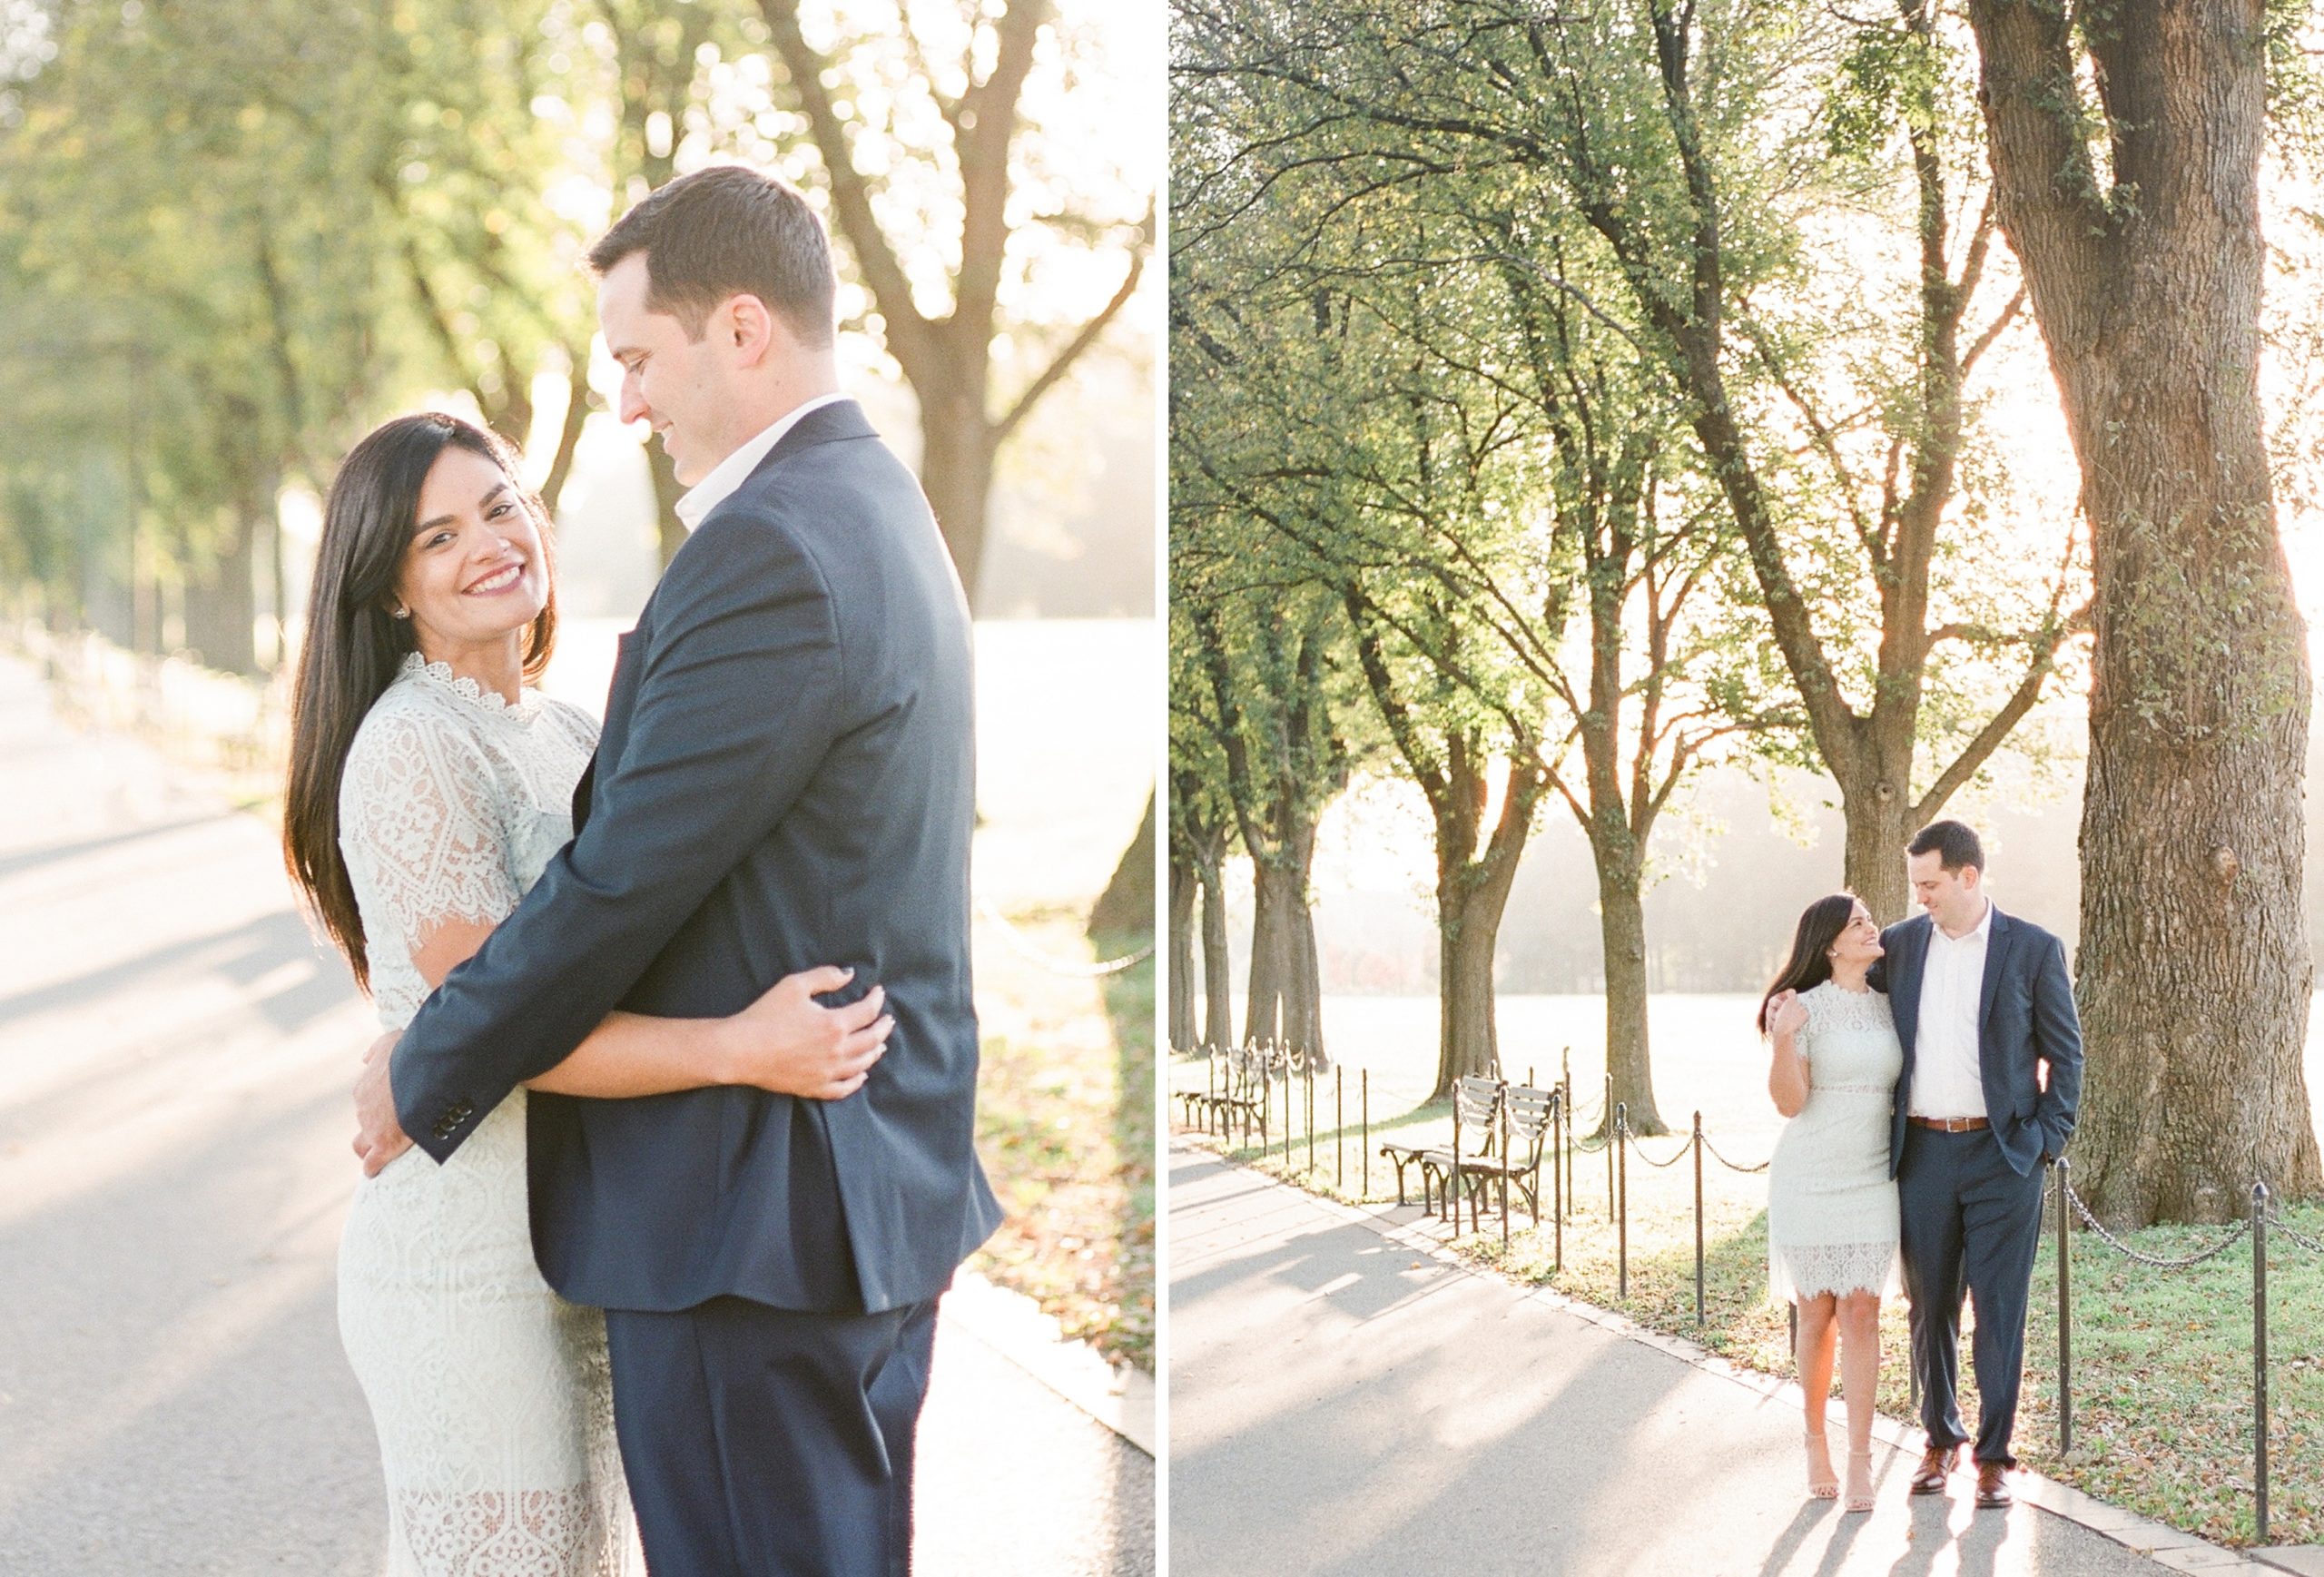 A sunrise engagement session captured on film at the Lincoln Memorial and DC War Memorial in downtown Washington, DC.